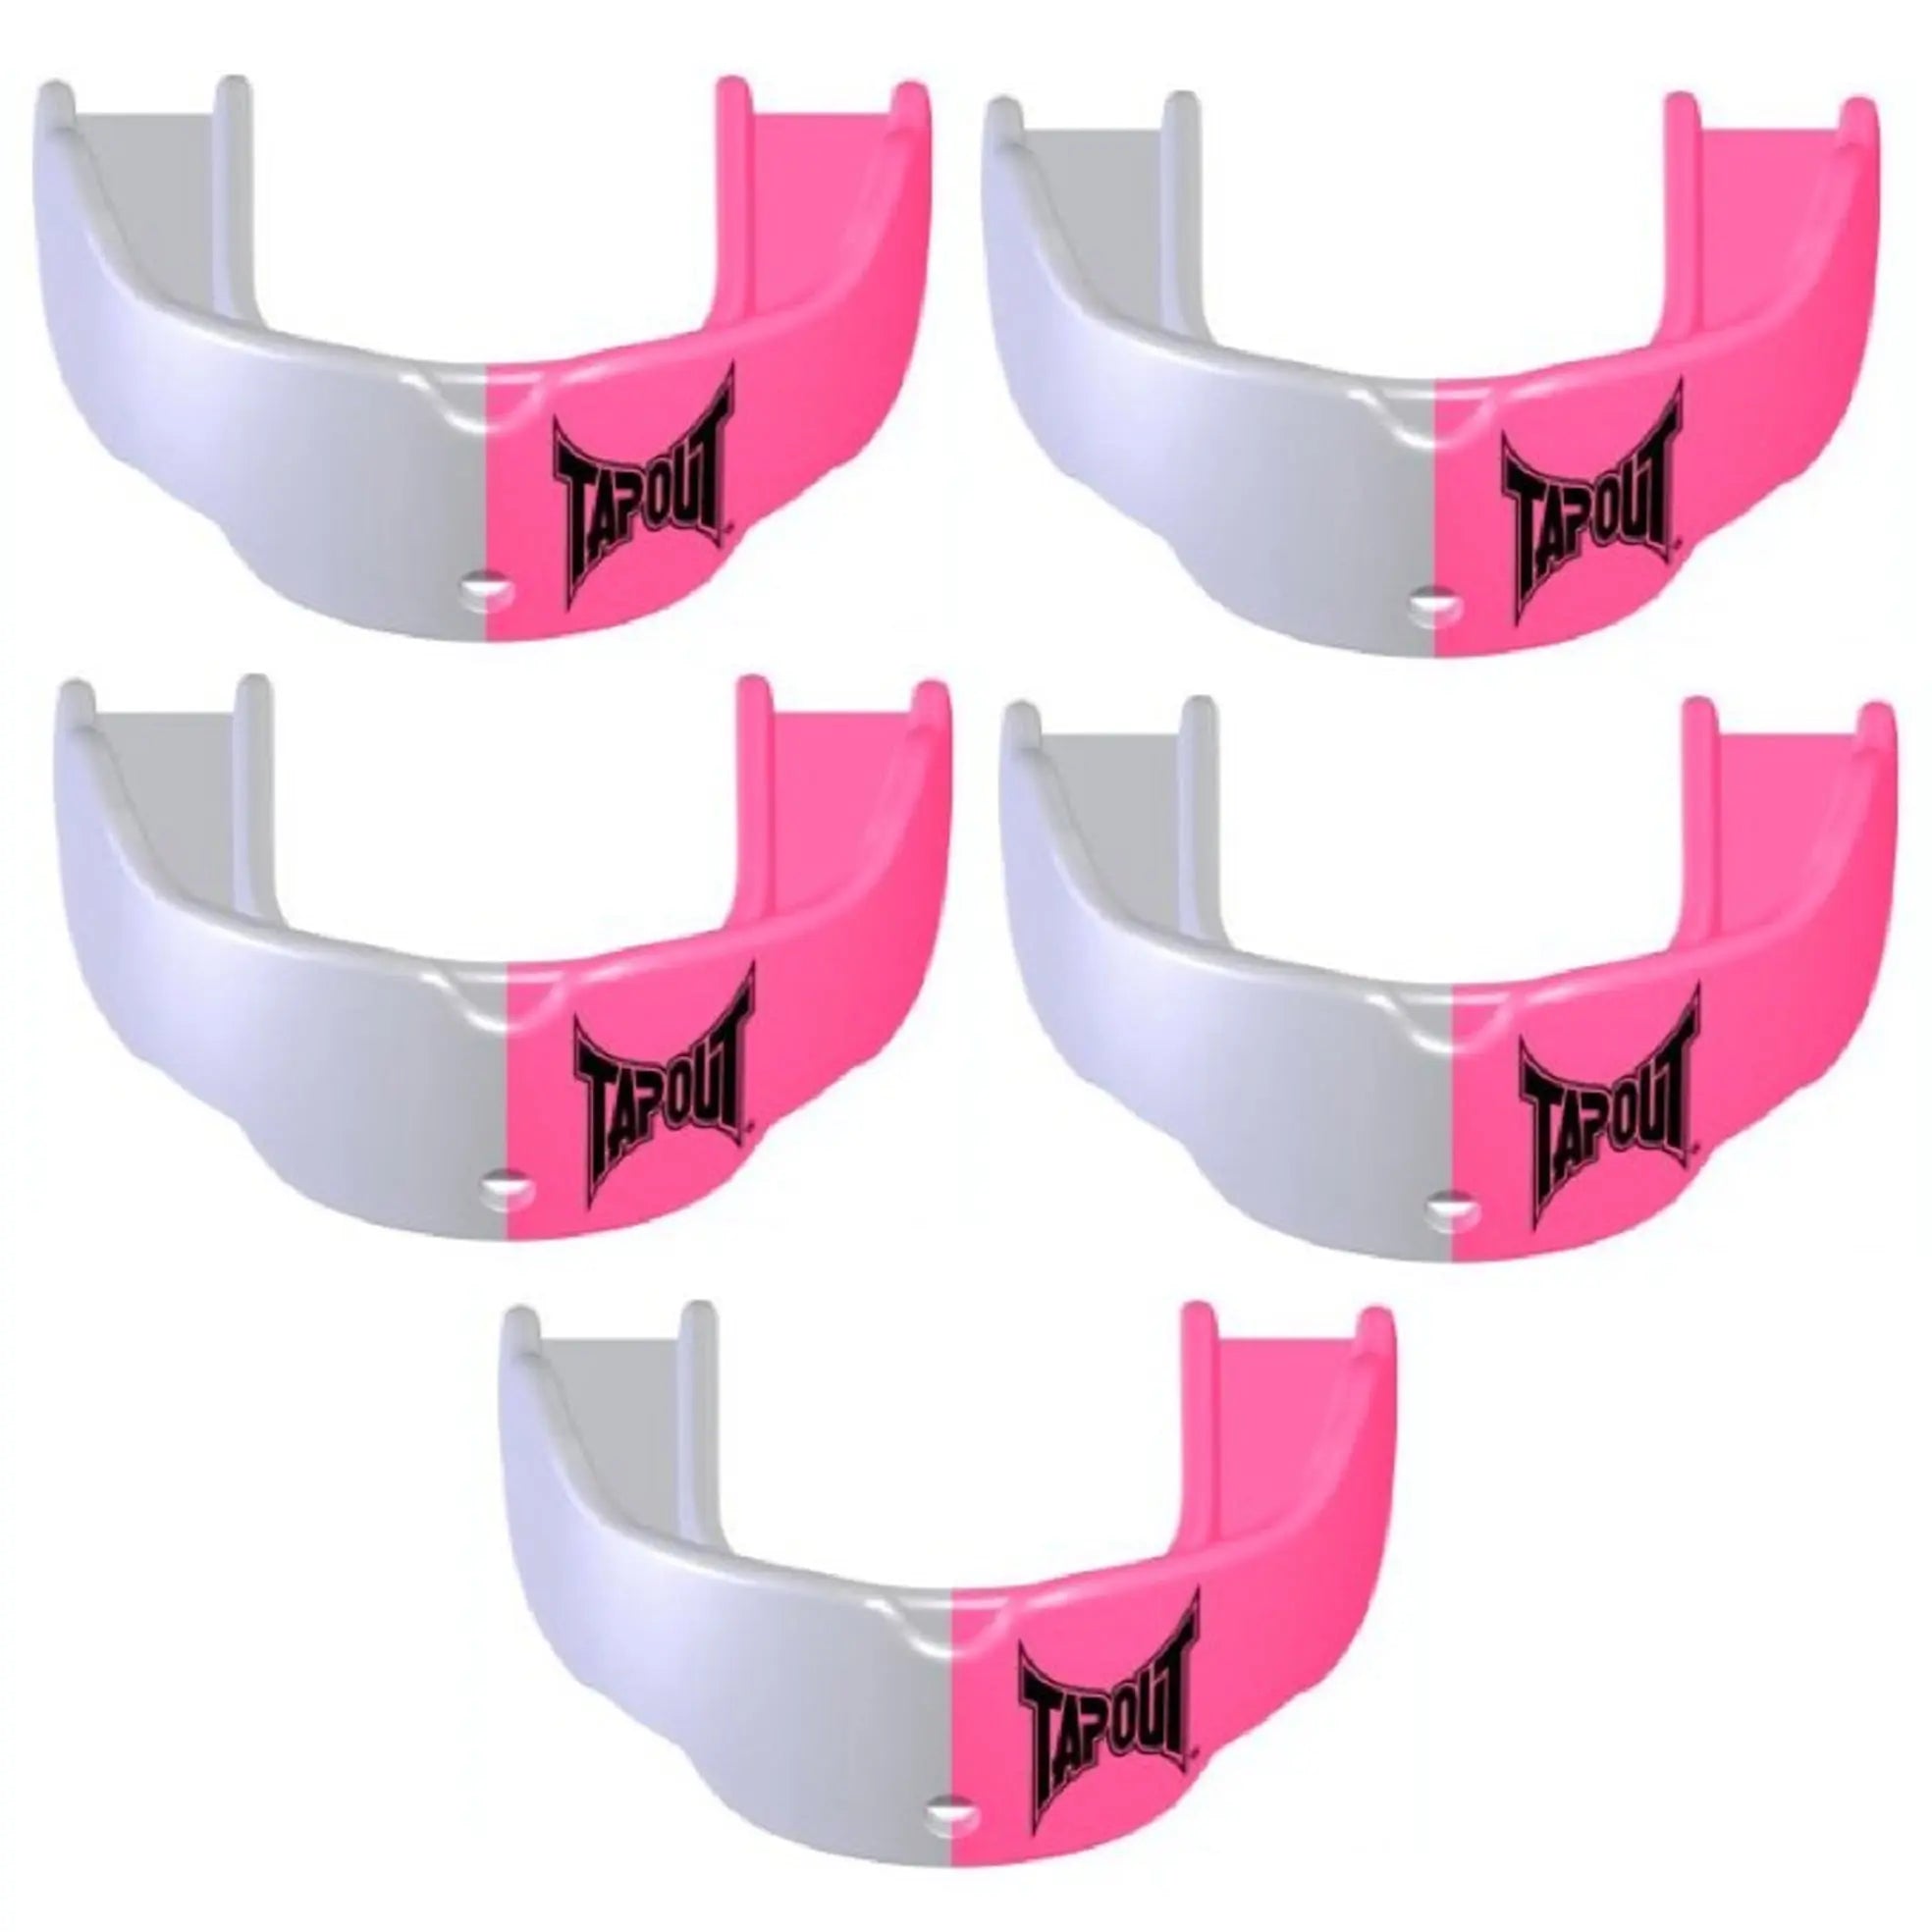 Tapout Adult Protective Sports Mouthguard with Strap 5-Pack - Pink/White Tapout